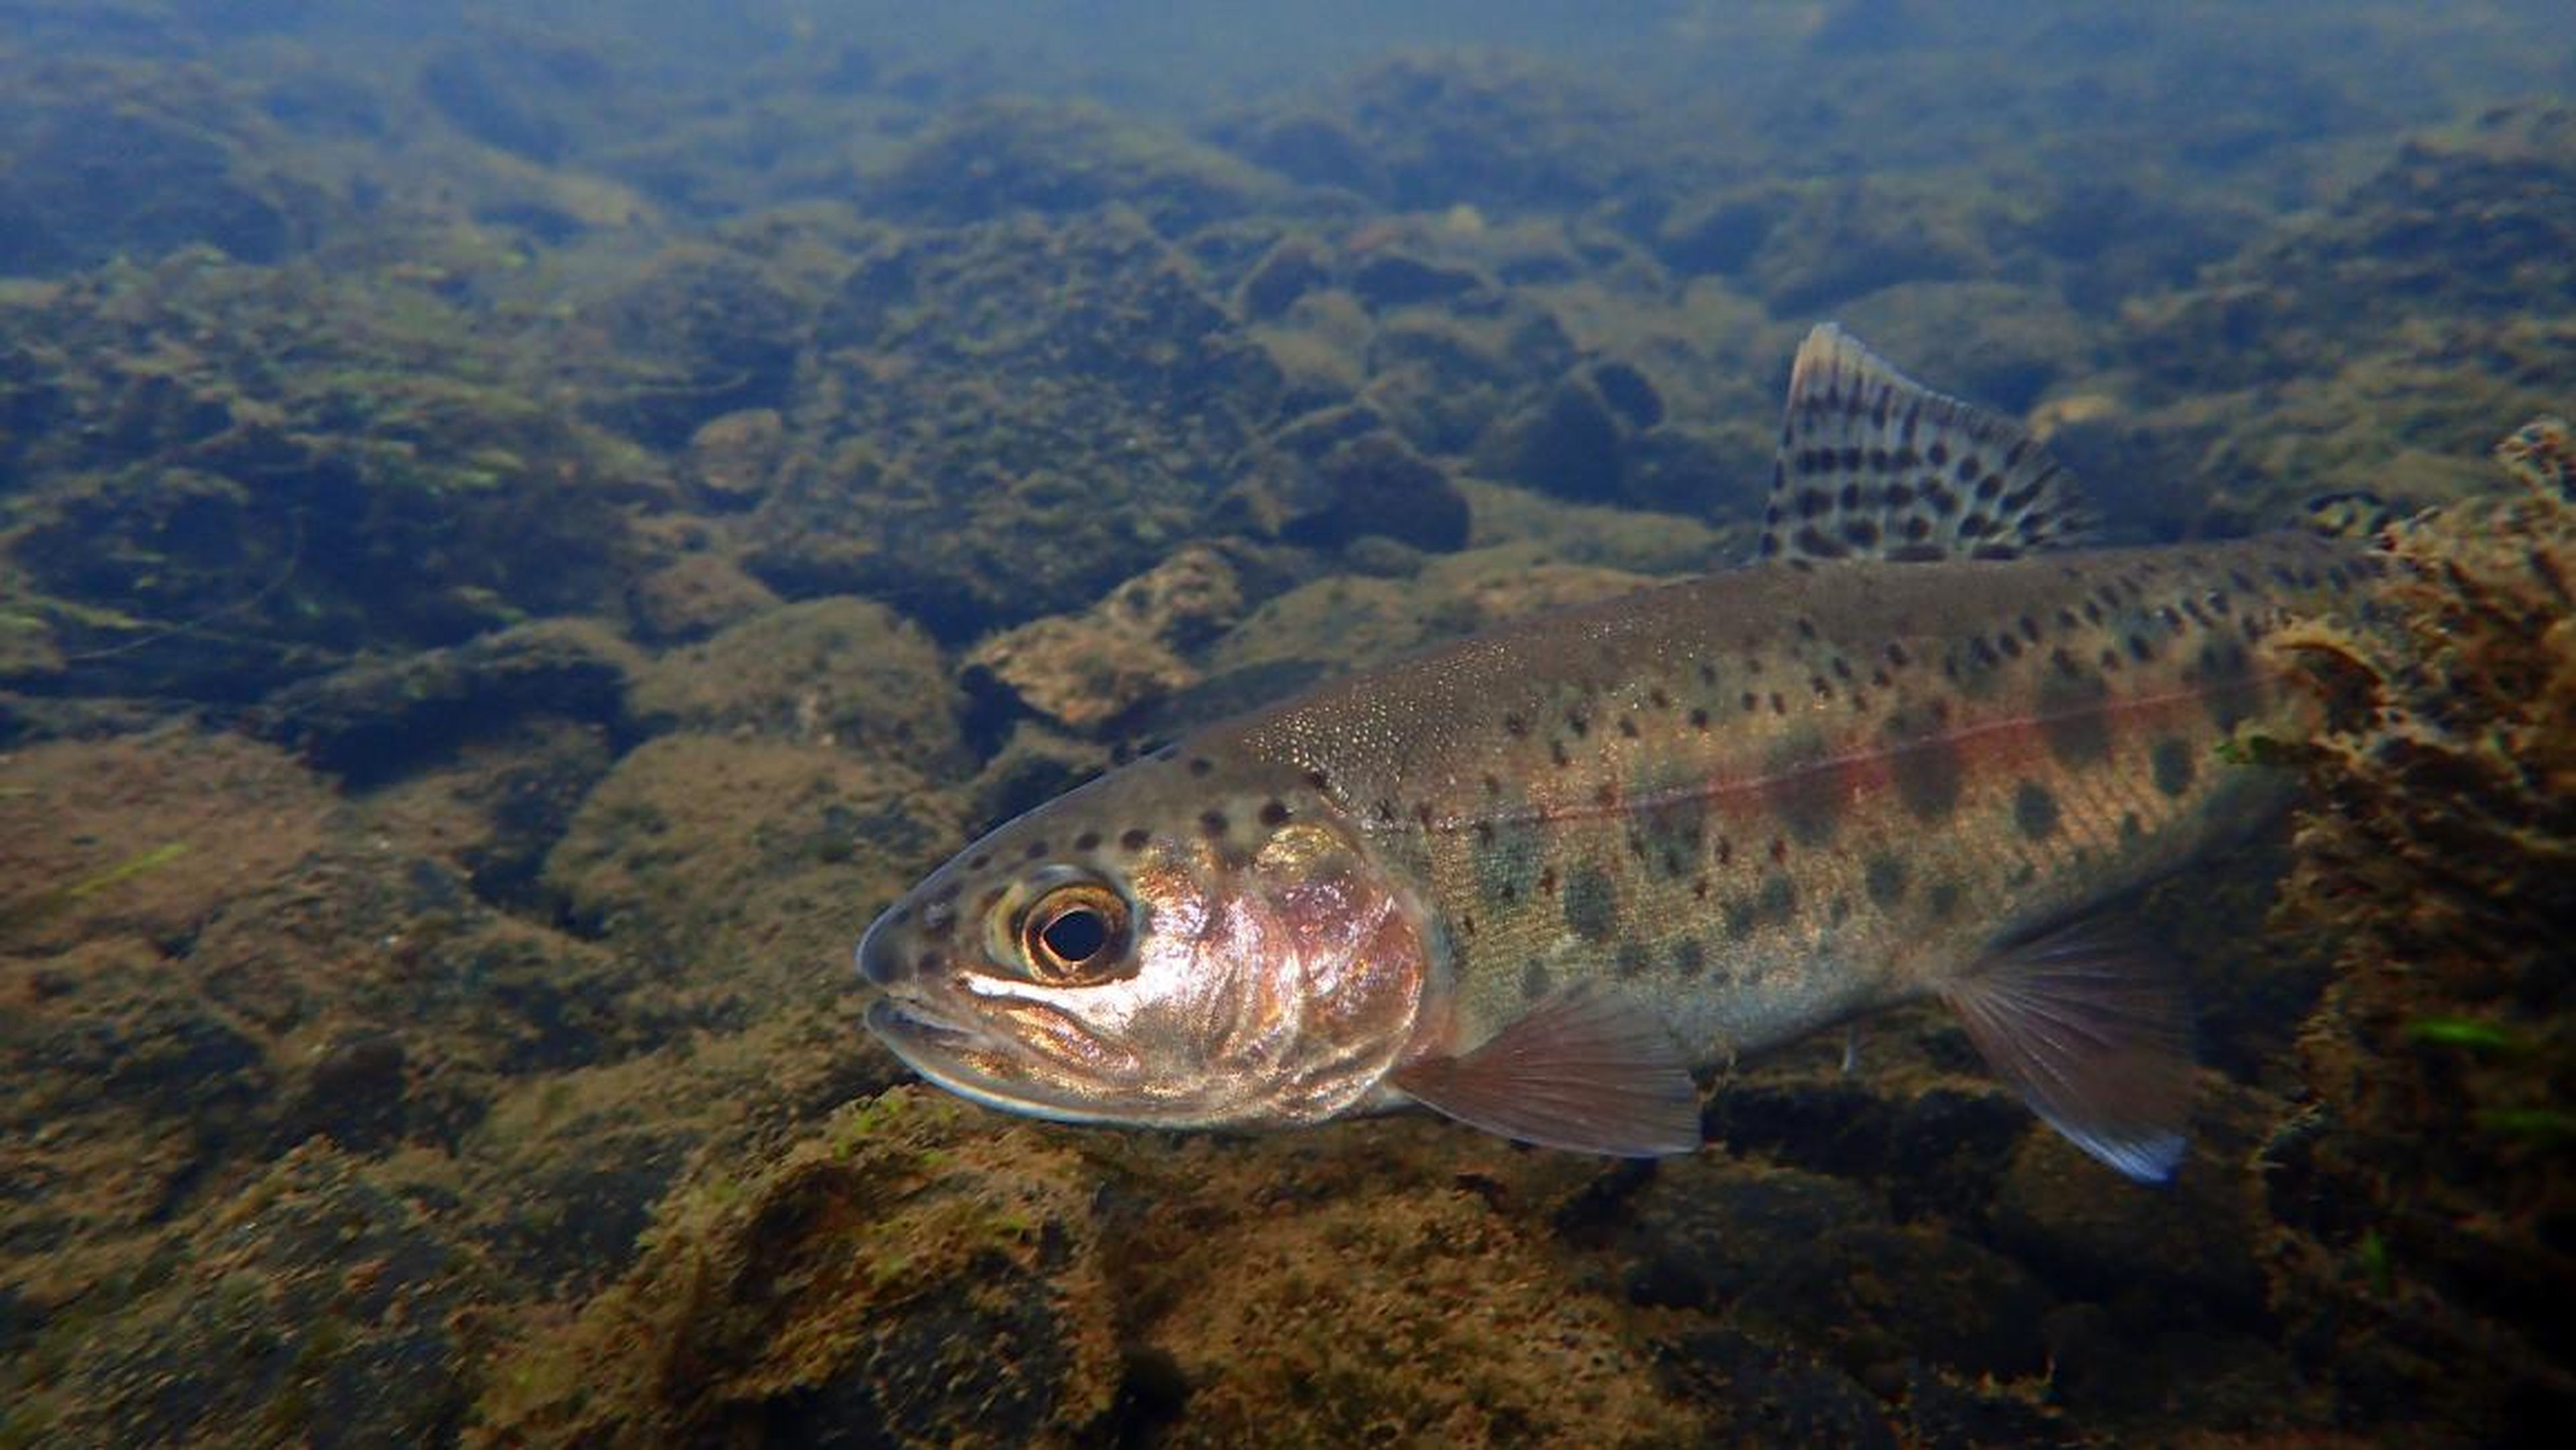 The Goose Lake redband trout is endemic to tributaries in northeastern California and southeastern Oregon.